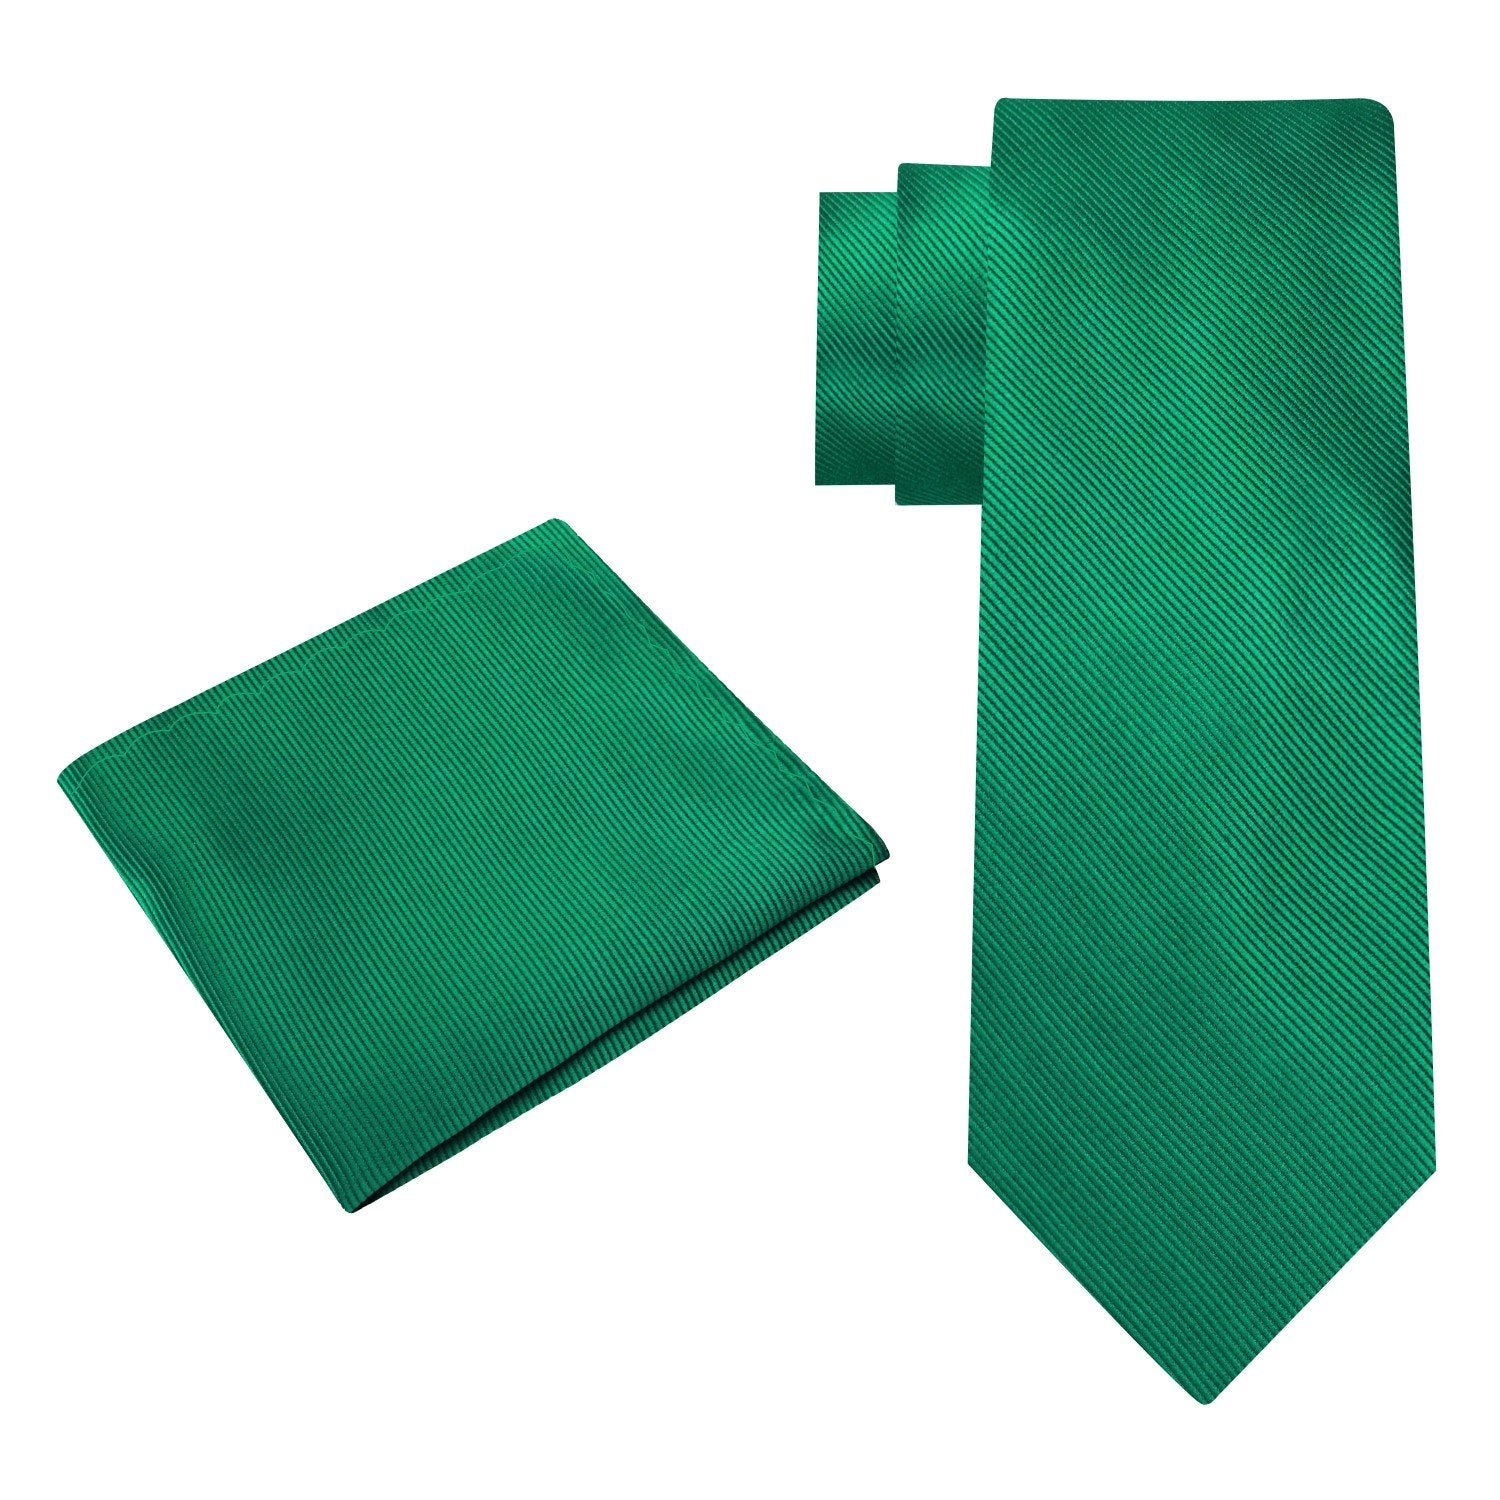 Alt View: Essential Solid Green Tie and Pocket Square